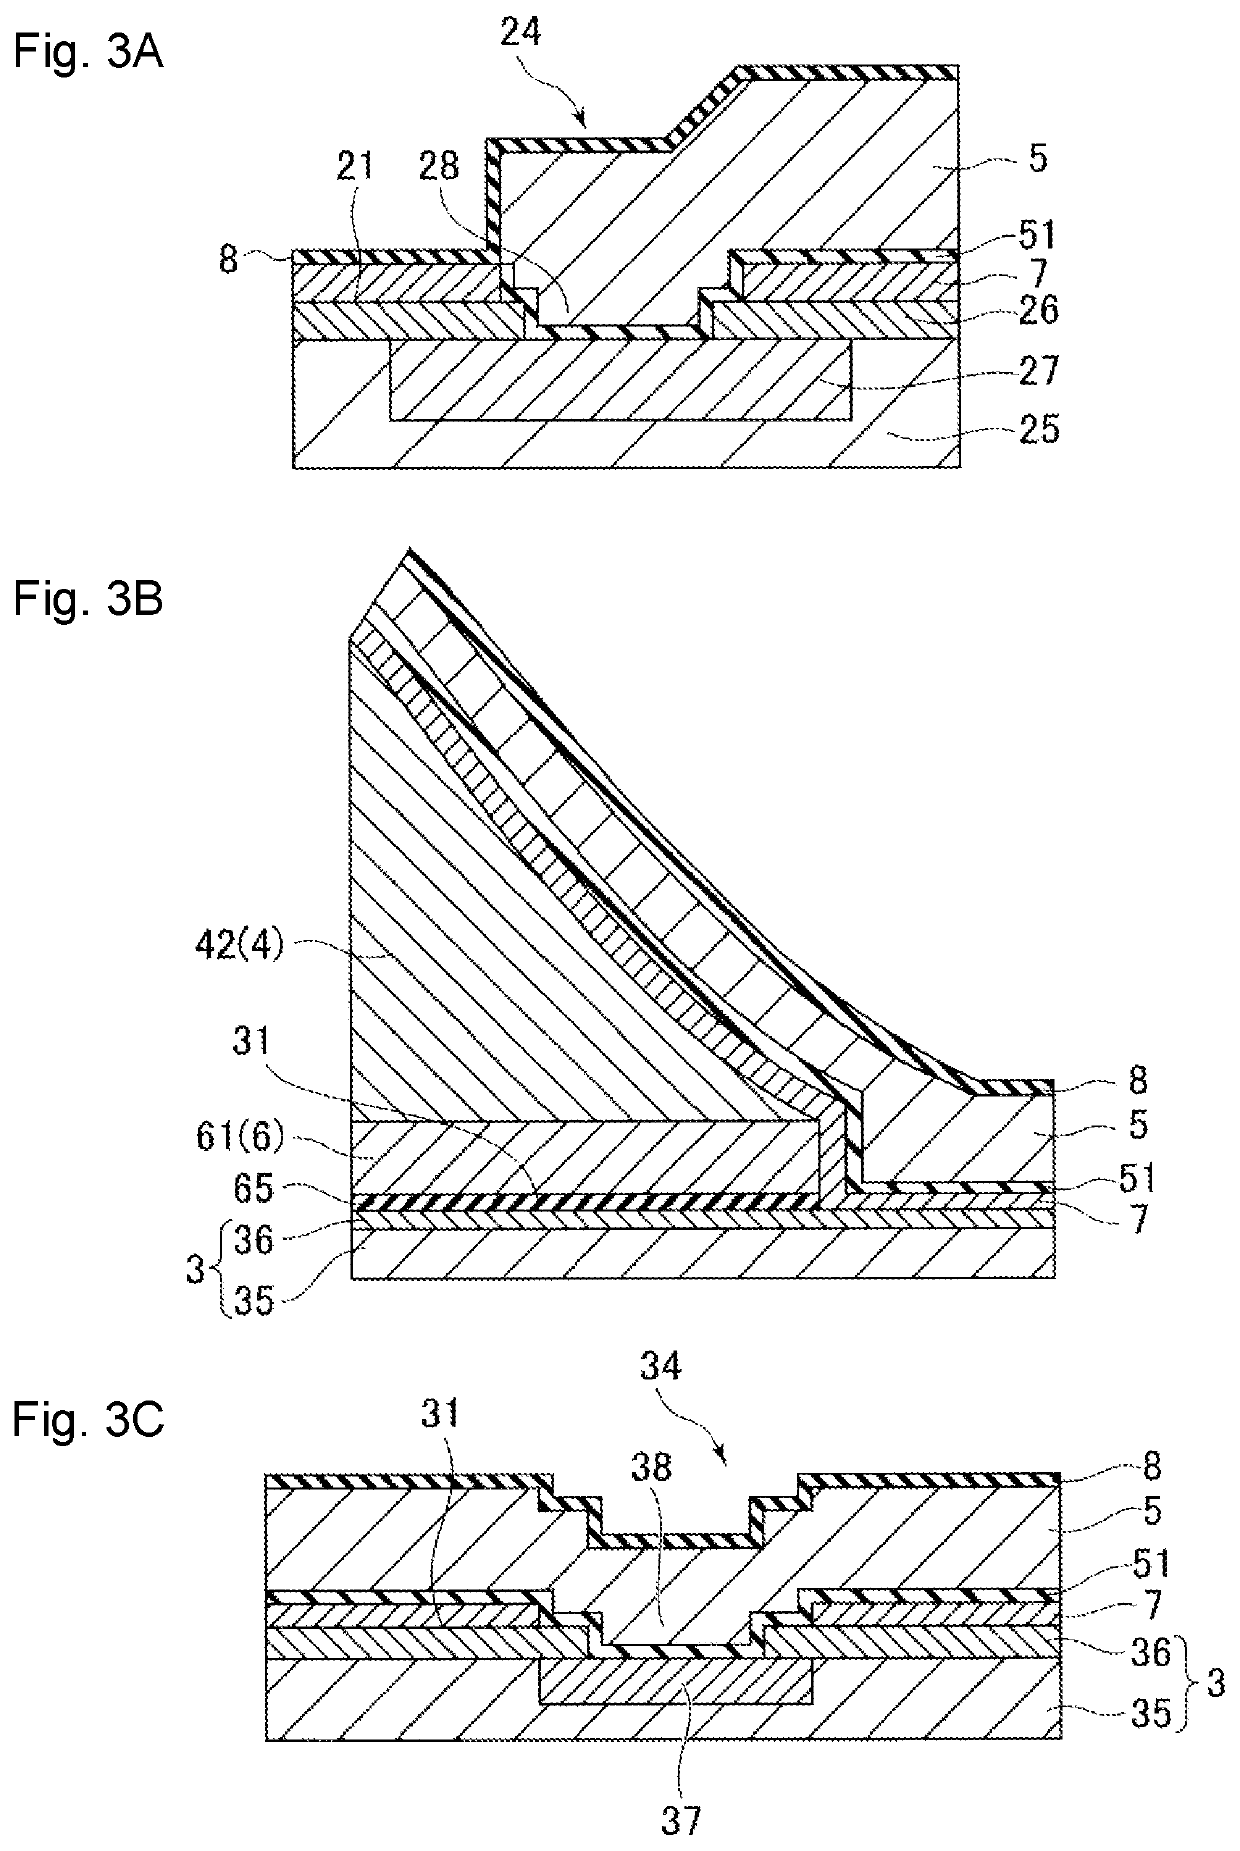 Stack of electrical components and method of producing the same